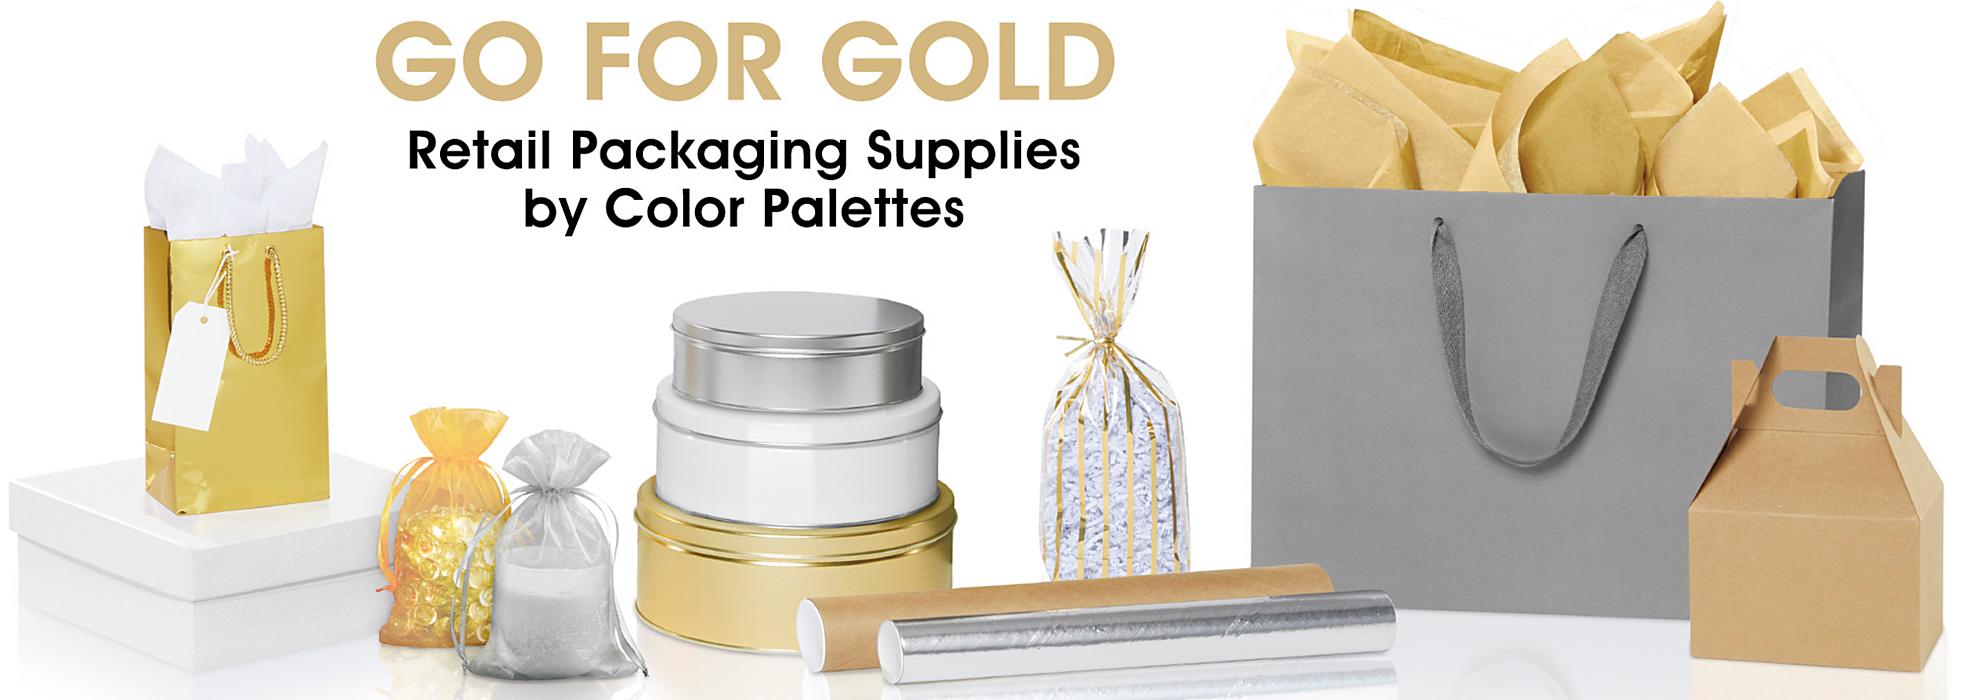 Go For Gold - Retail Packaging Supplies by Color Palettes